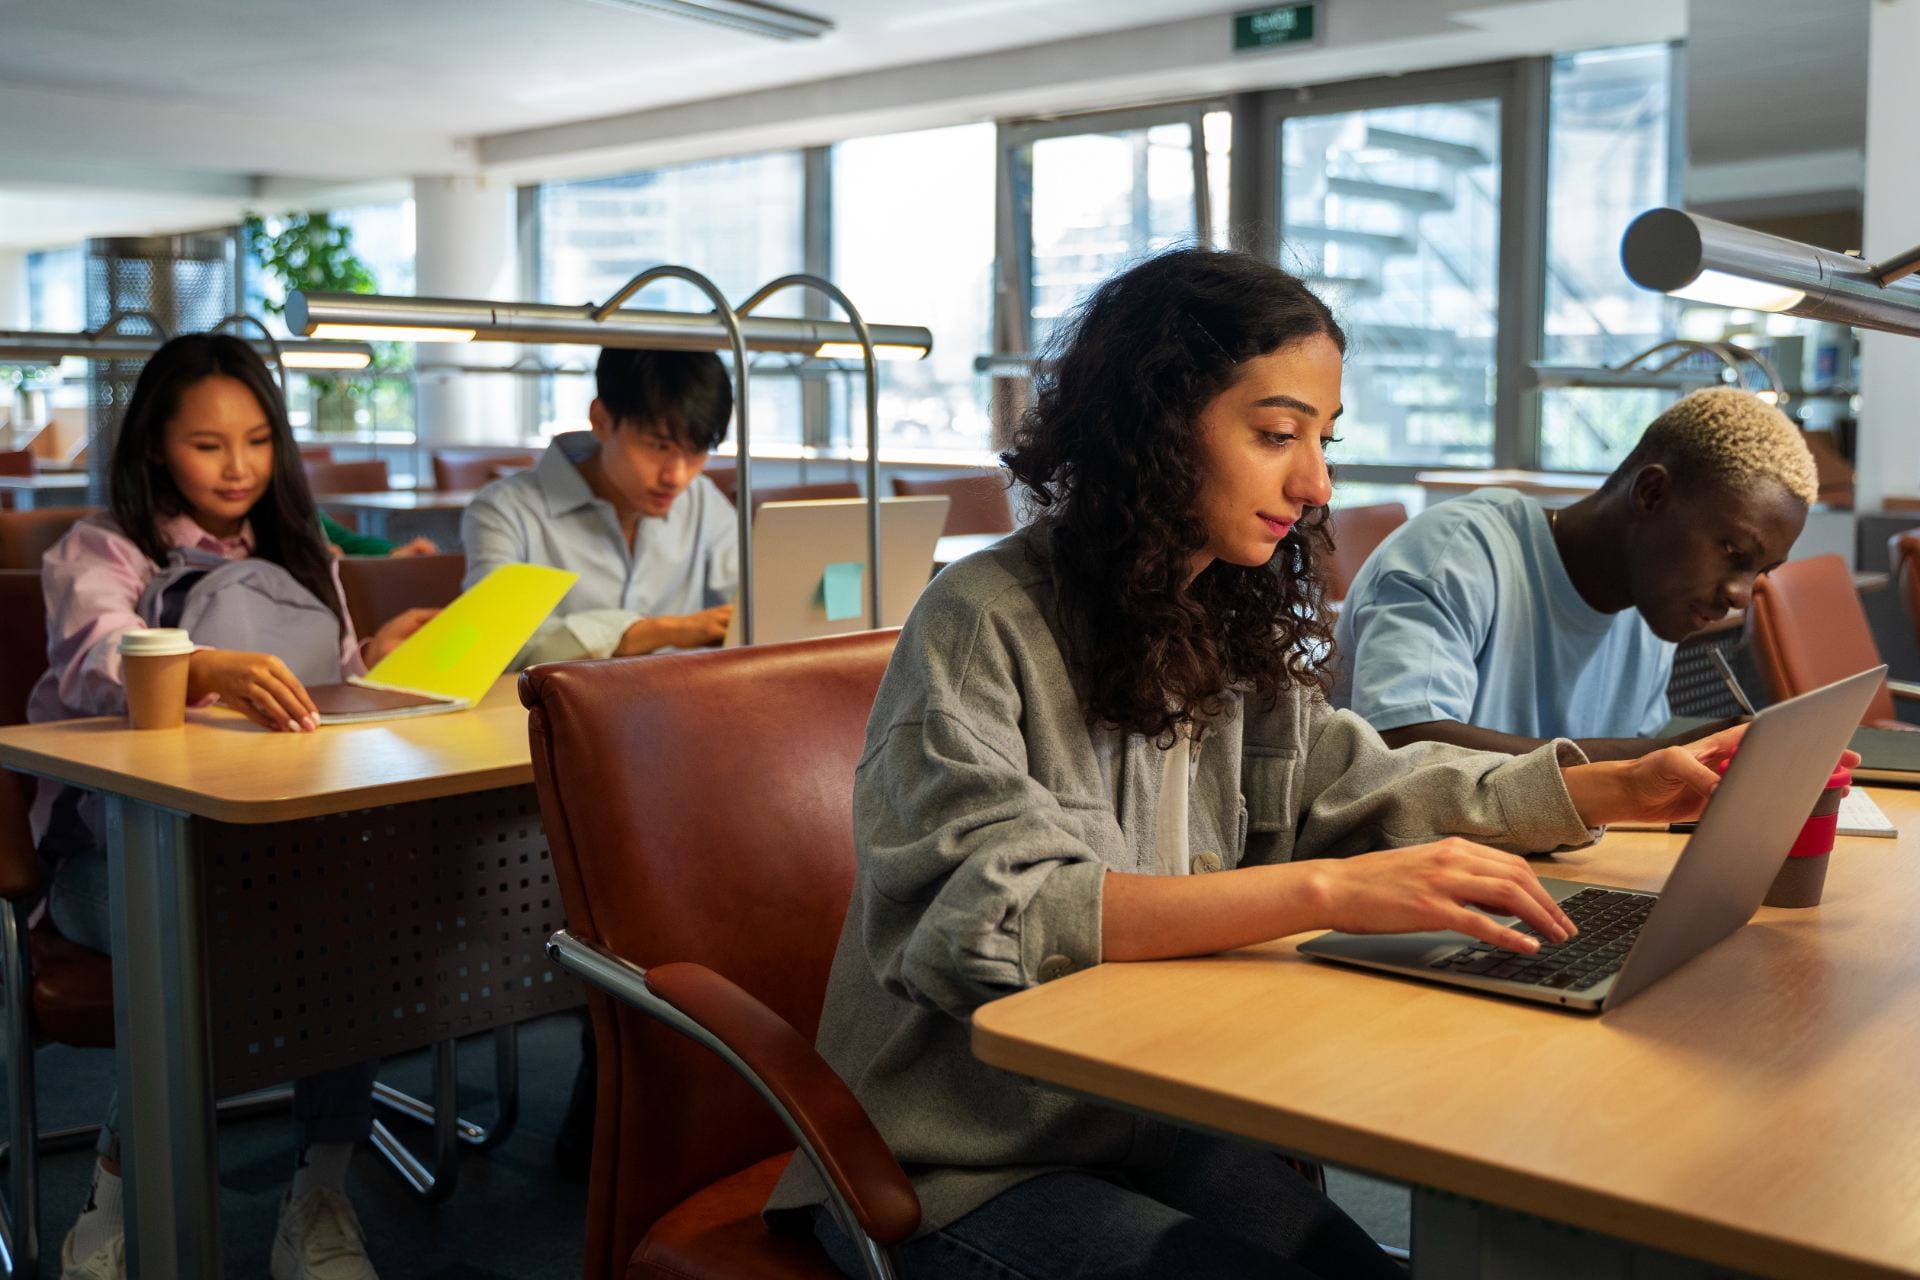 Image: Students in a library. Some are working on laptops while others use notebooks.